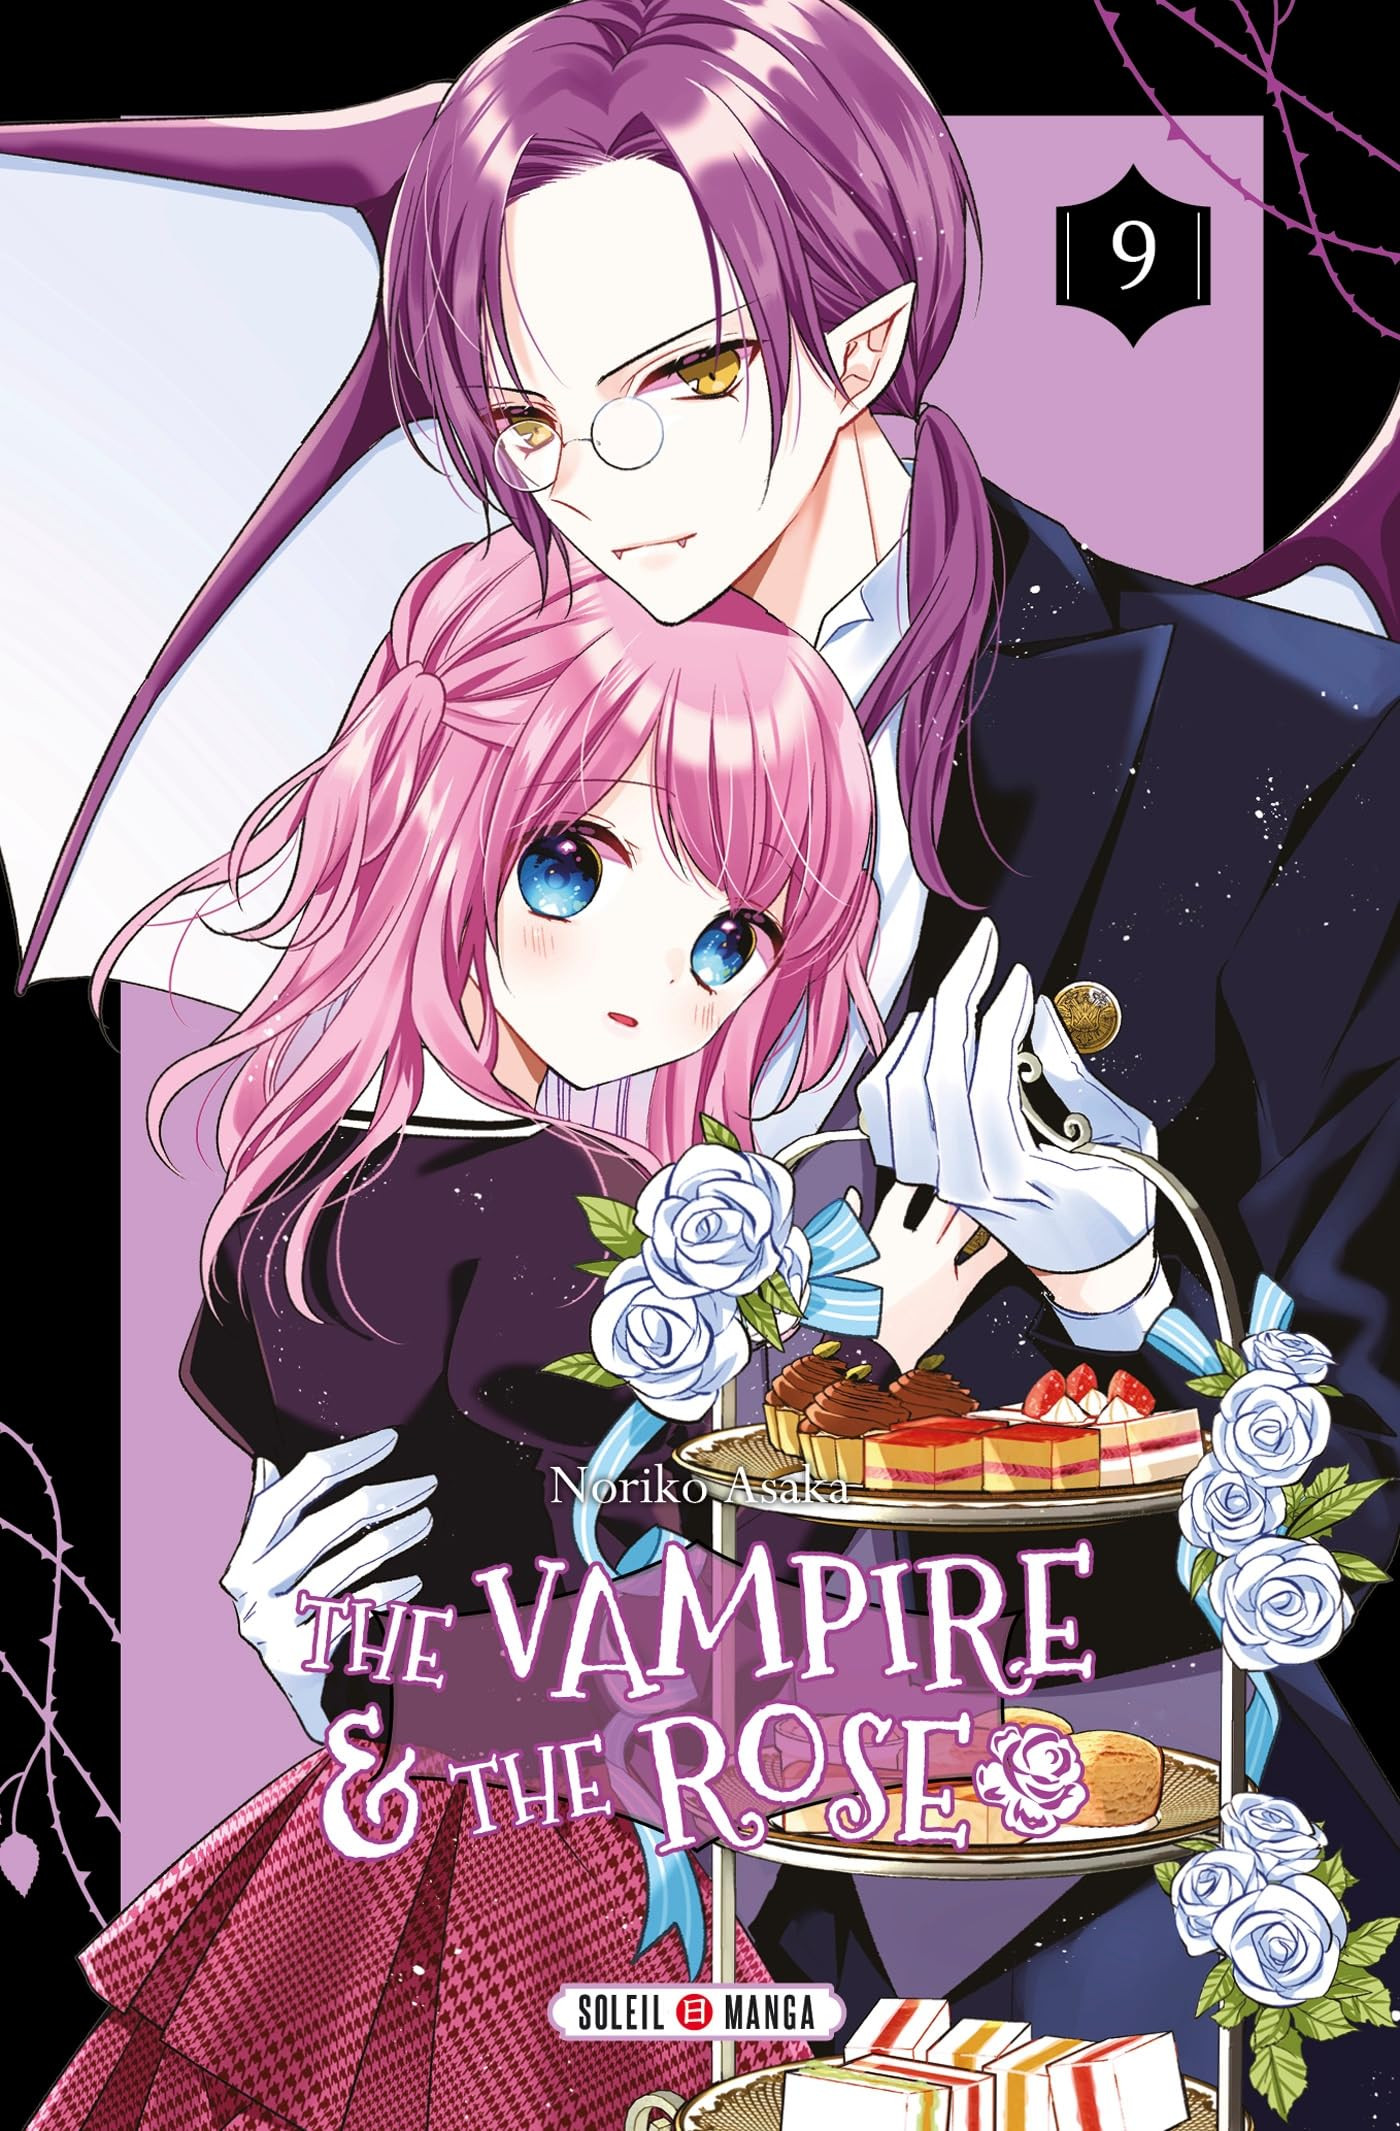 The Vampire and the Rose Vol.9